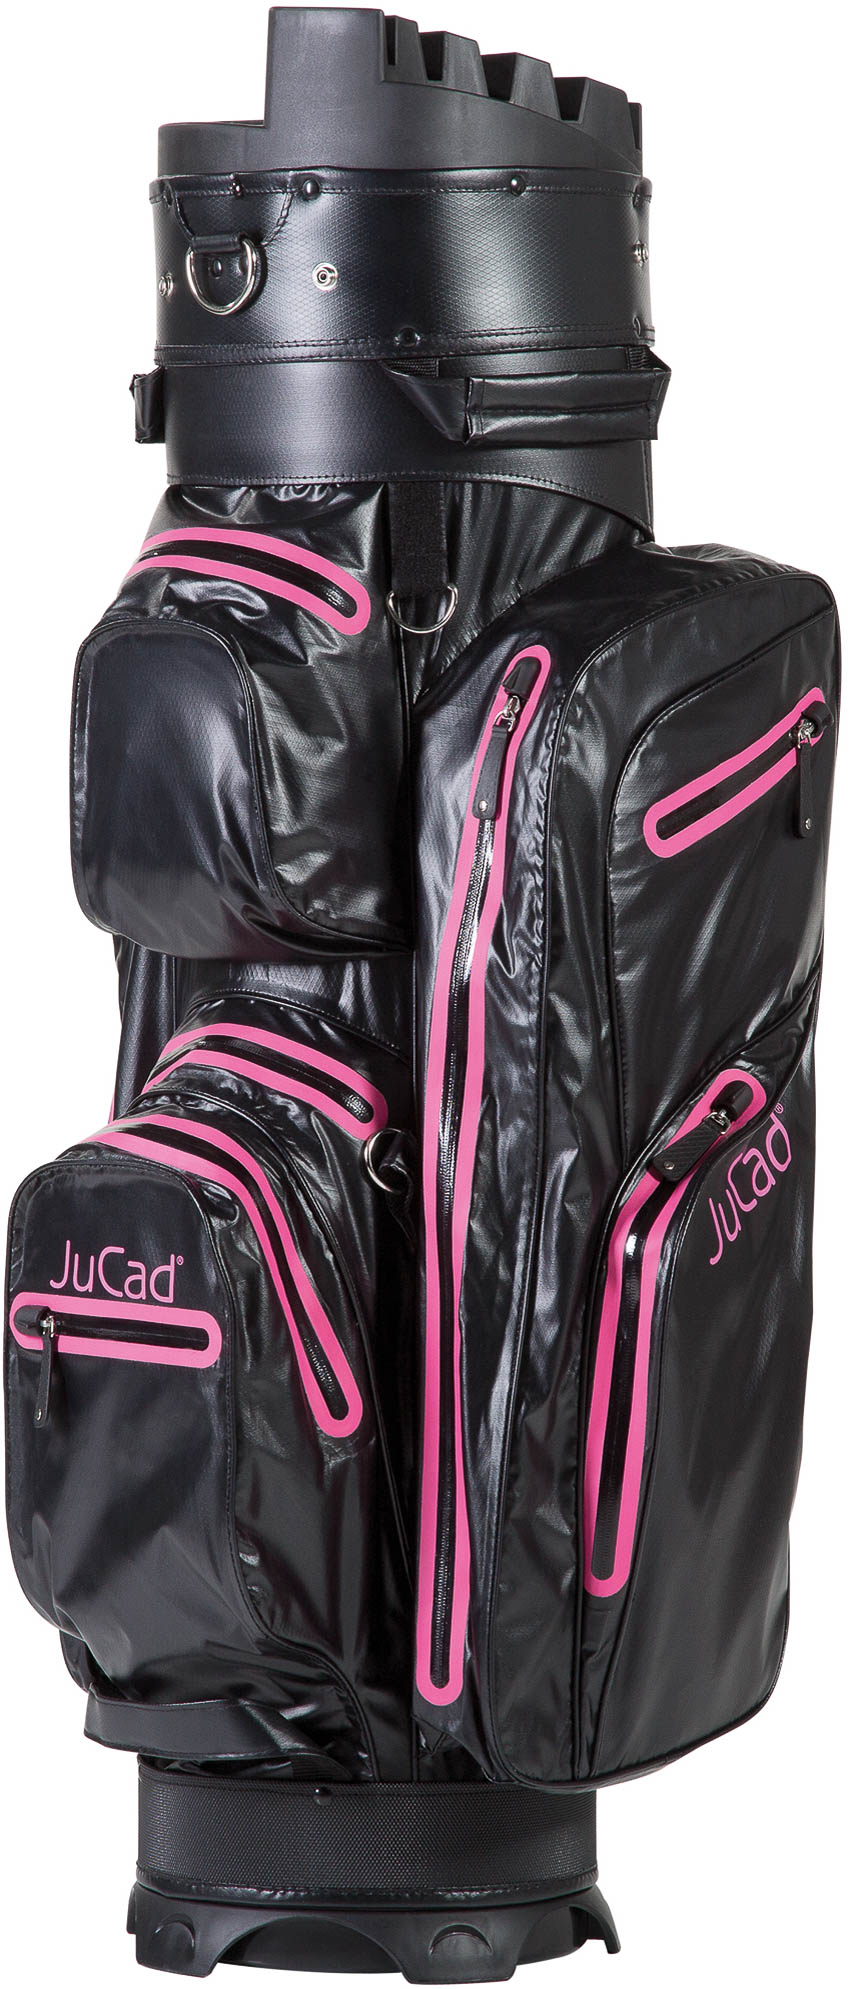 JuCad Manager Dry Cartbag